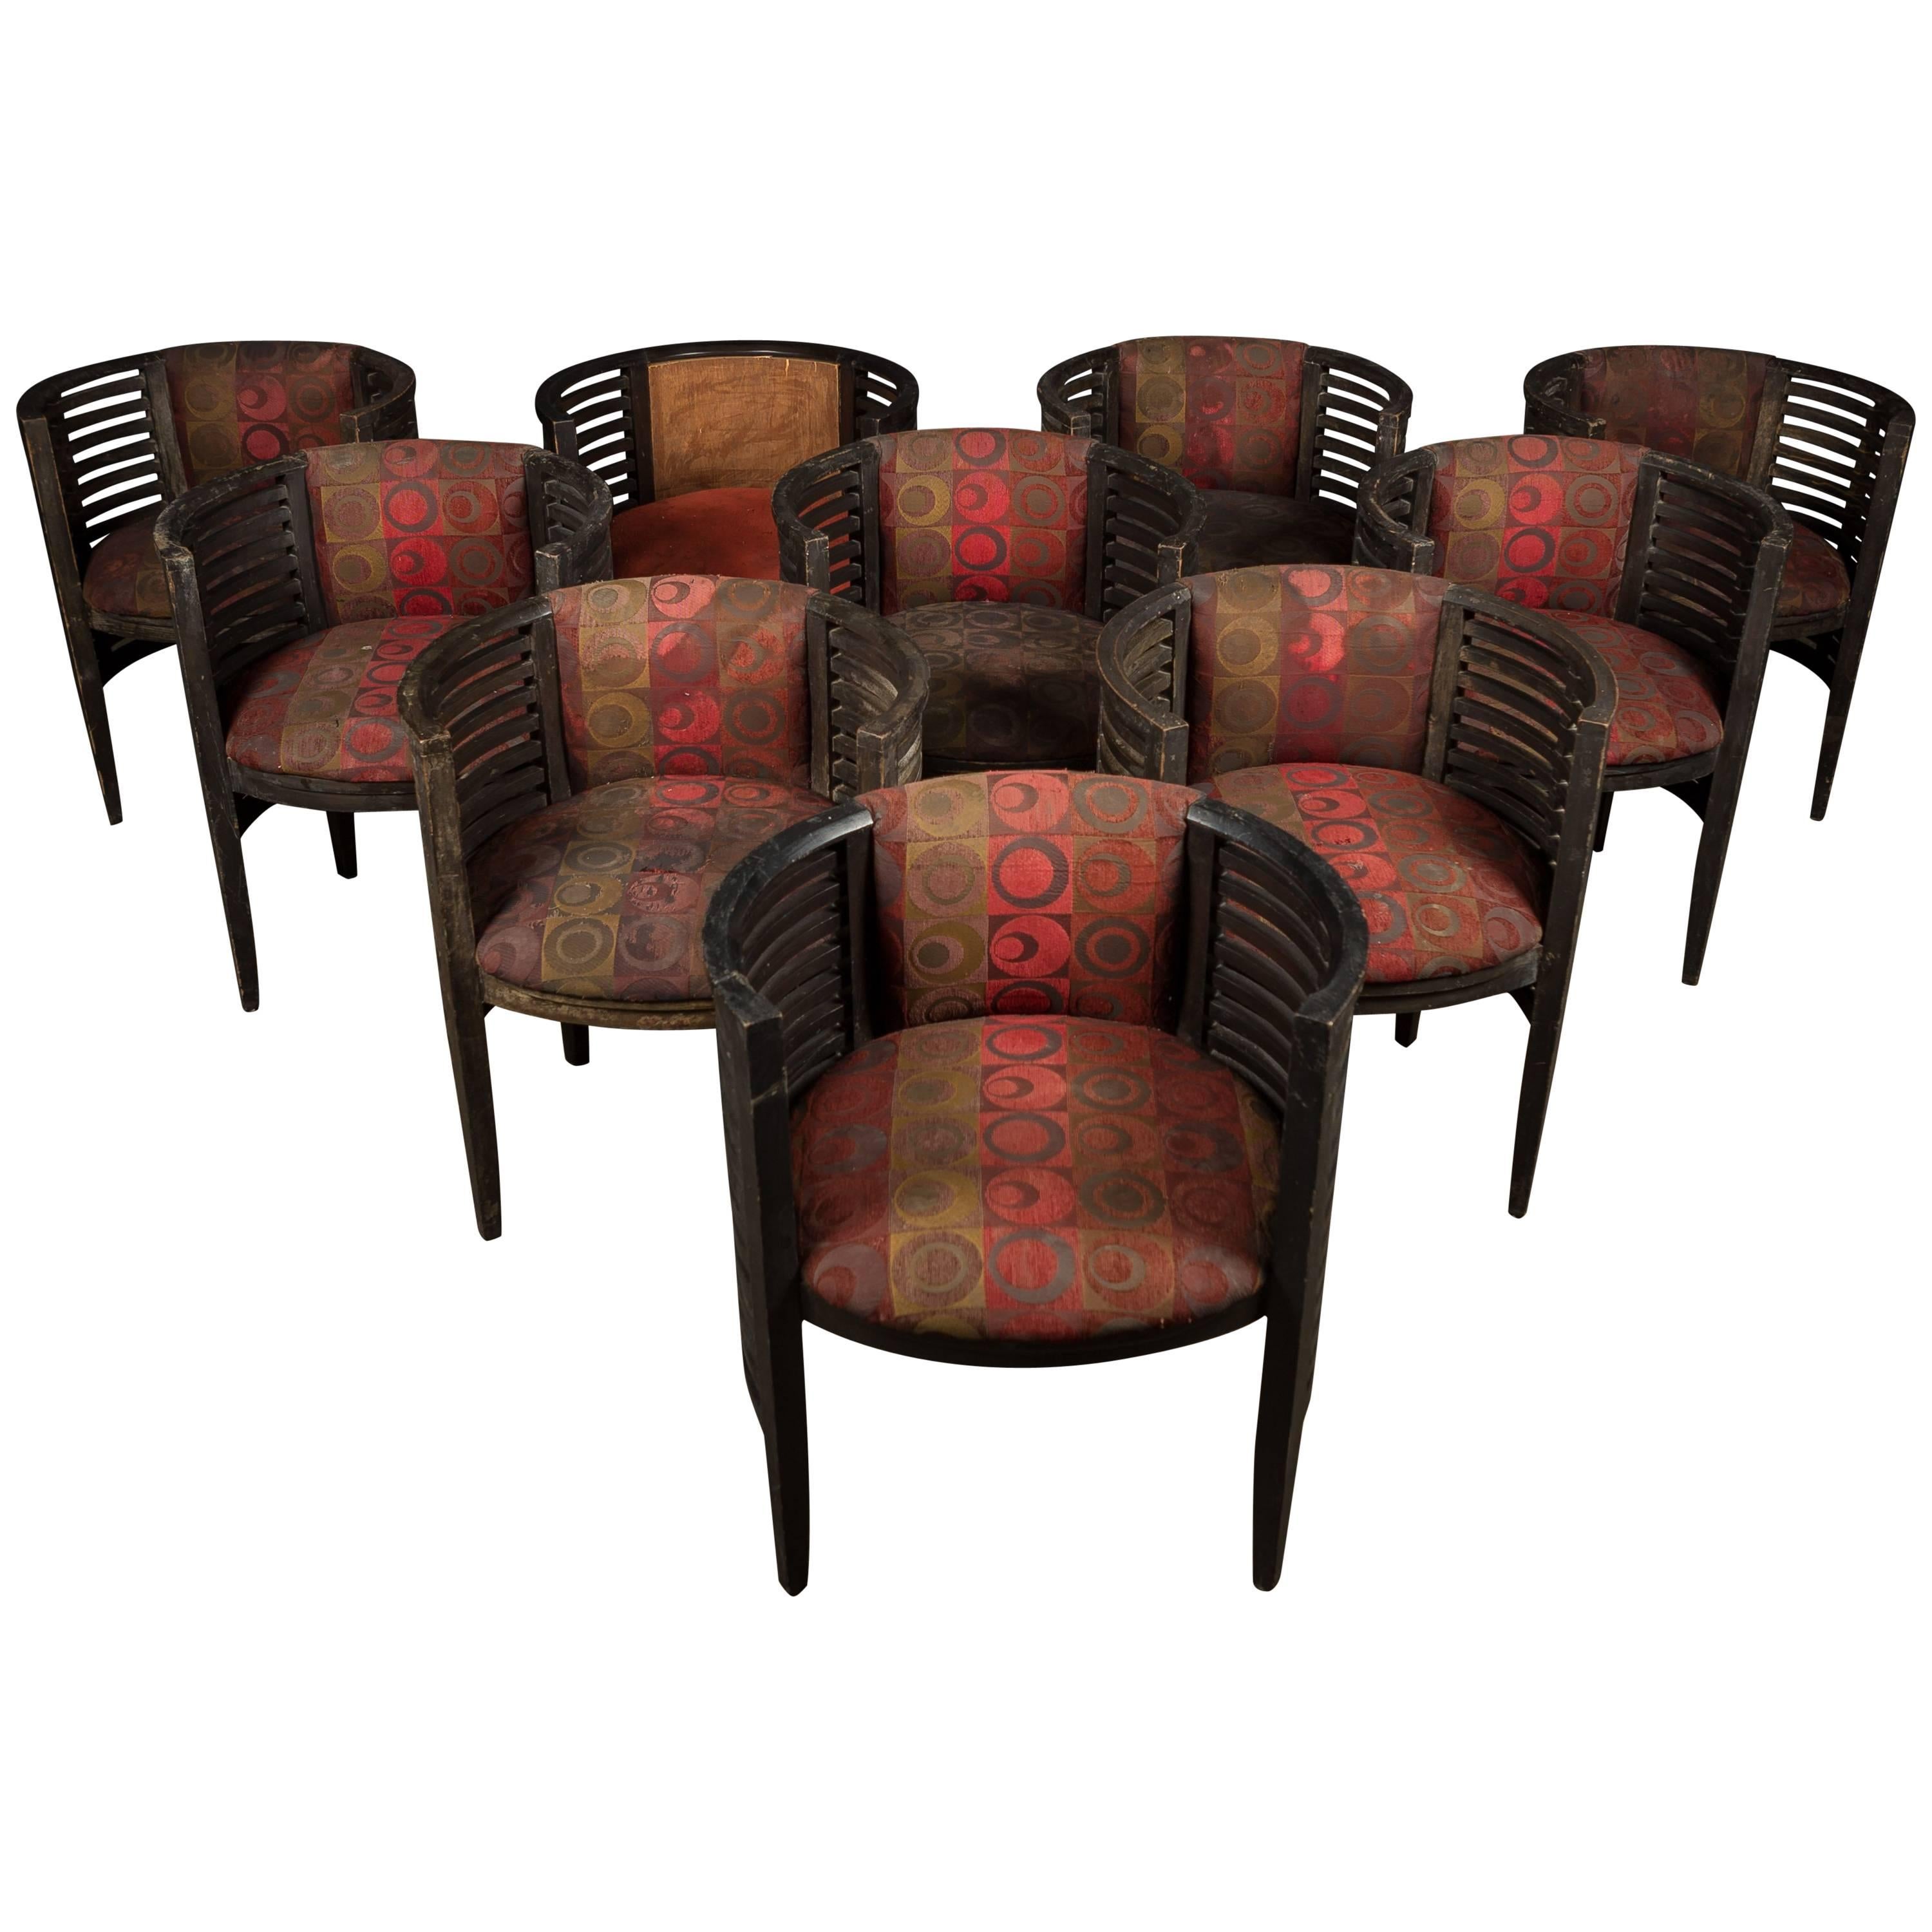 Set of Ten Art Deco Ebonized Tub Chairs from a Hotel in Bombay For Sale